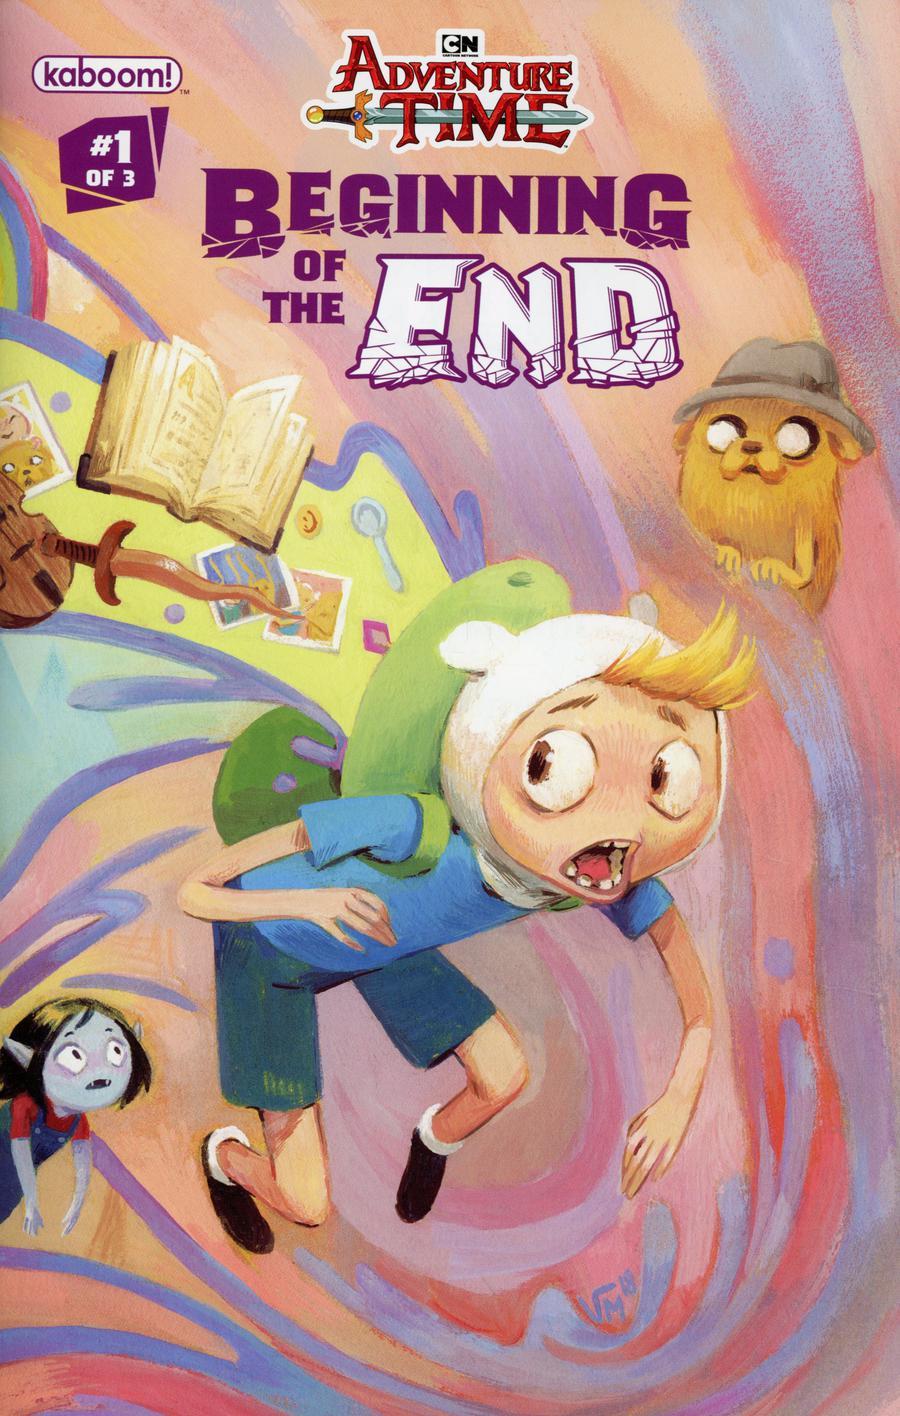 Adventure Time Beginning Of The End Vol. 1 #1